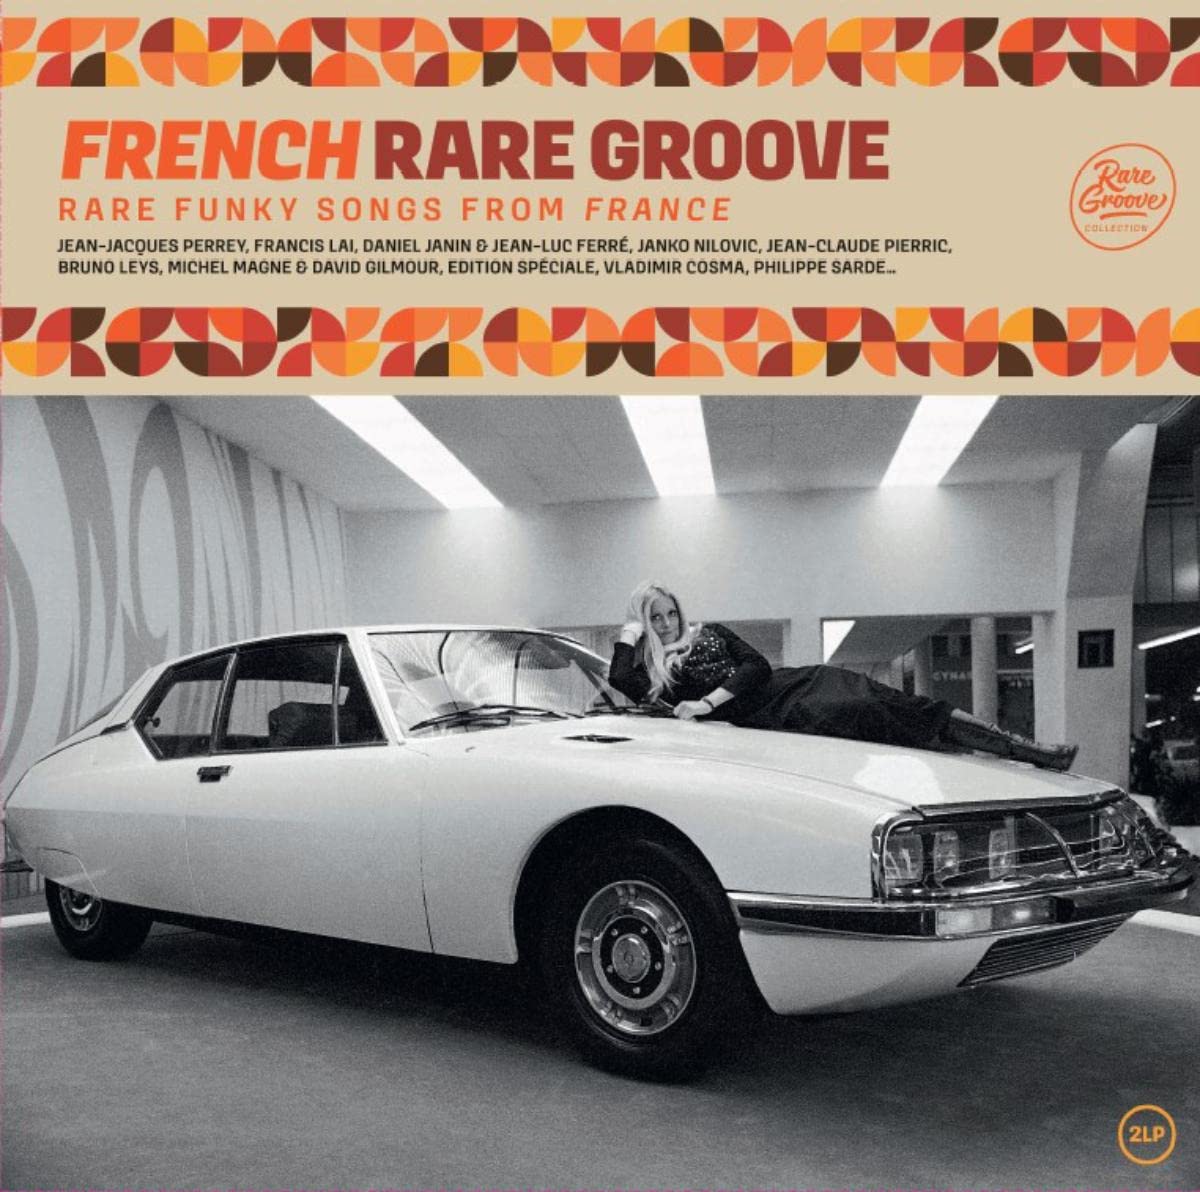 FRENCH RARE GROOVE - COMPILATION - DOUBLE ALBUM VINYLE